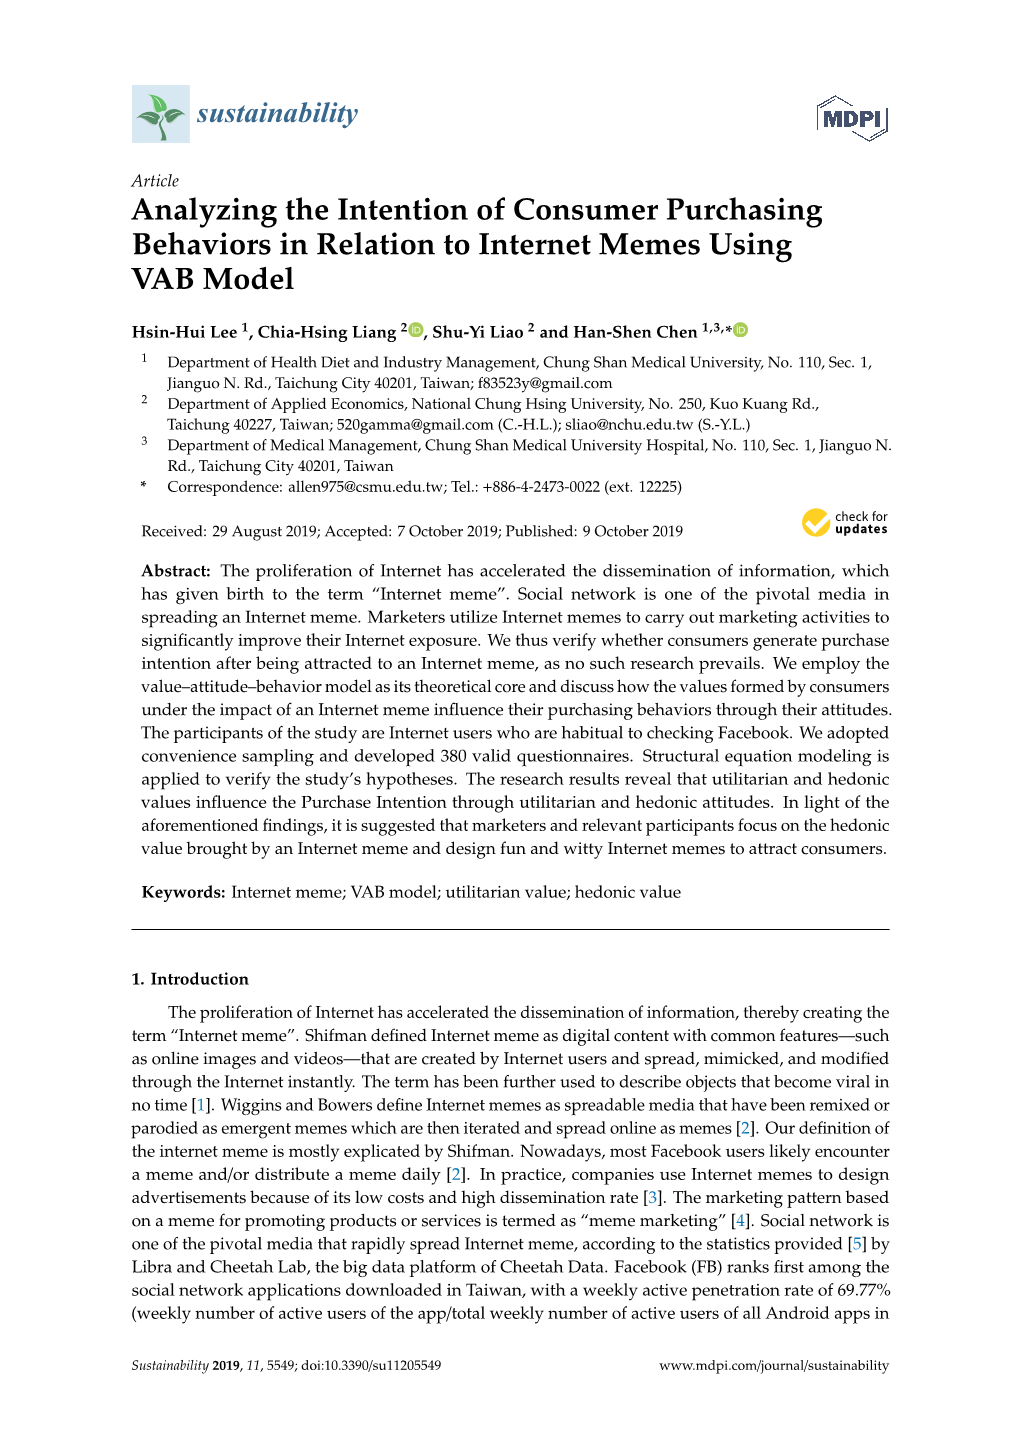 Analyzing the Intention of Consumer Purchasing Behaviors in Relation to Internet Memes Using VAB Model